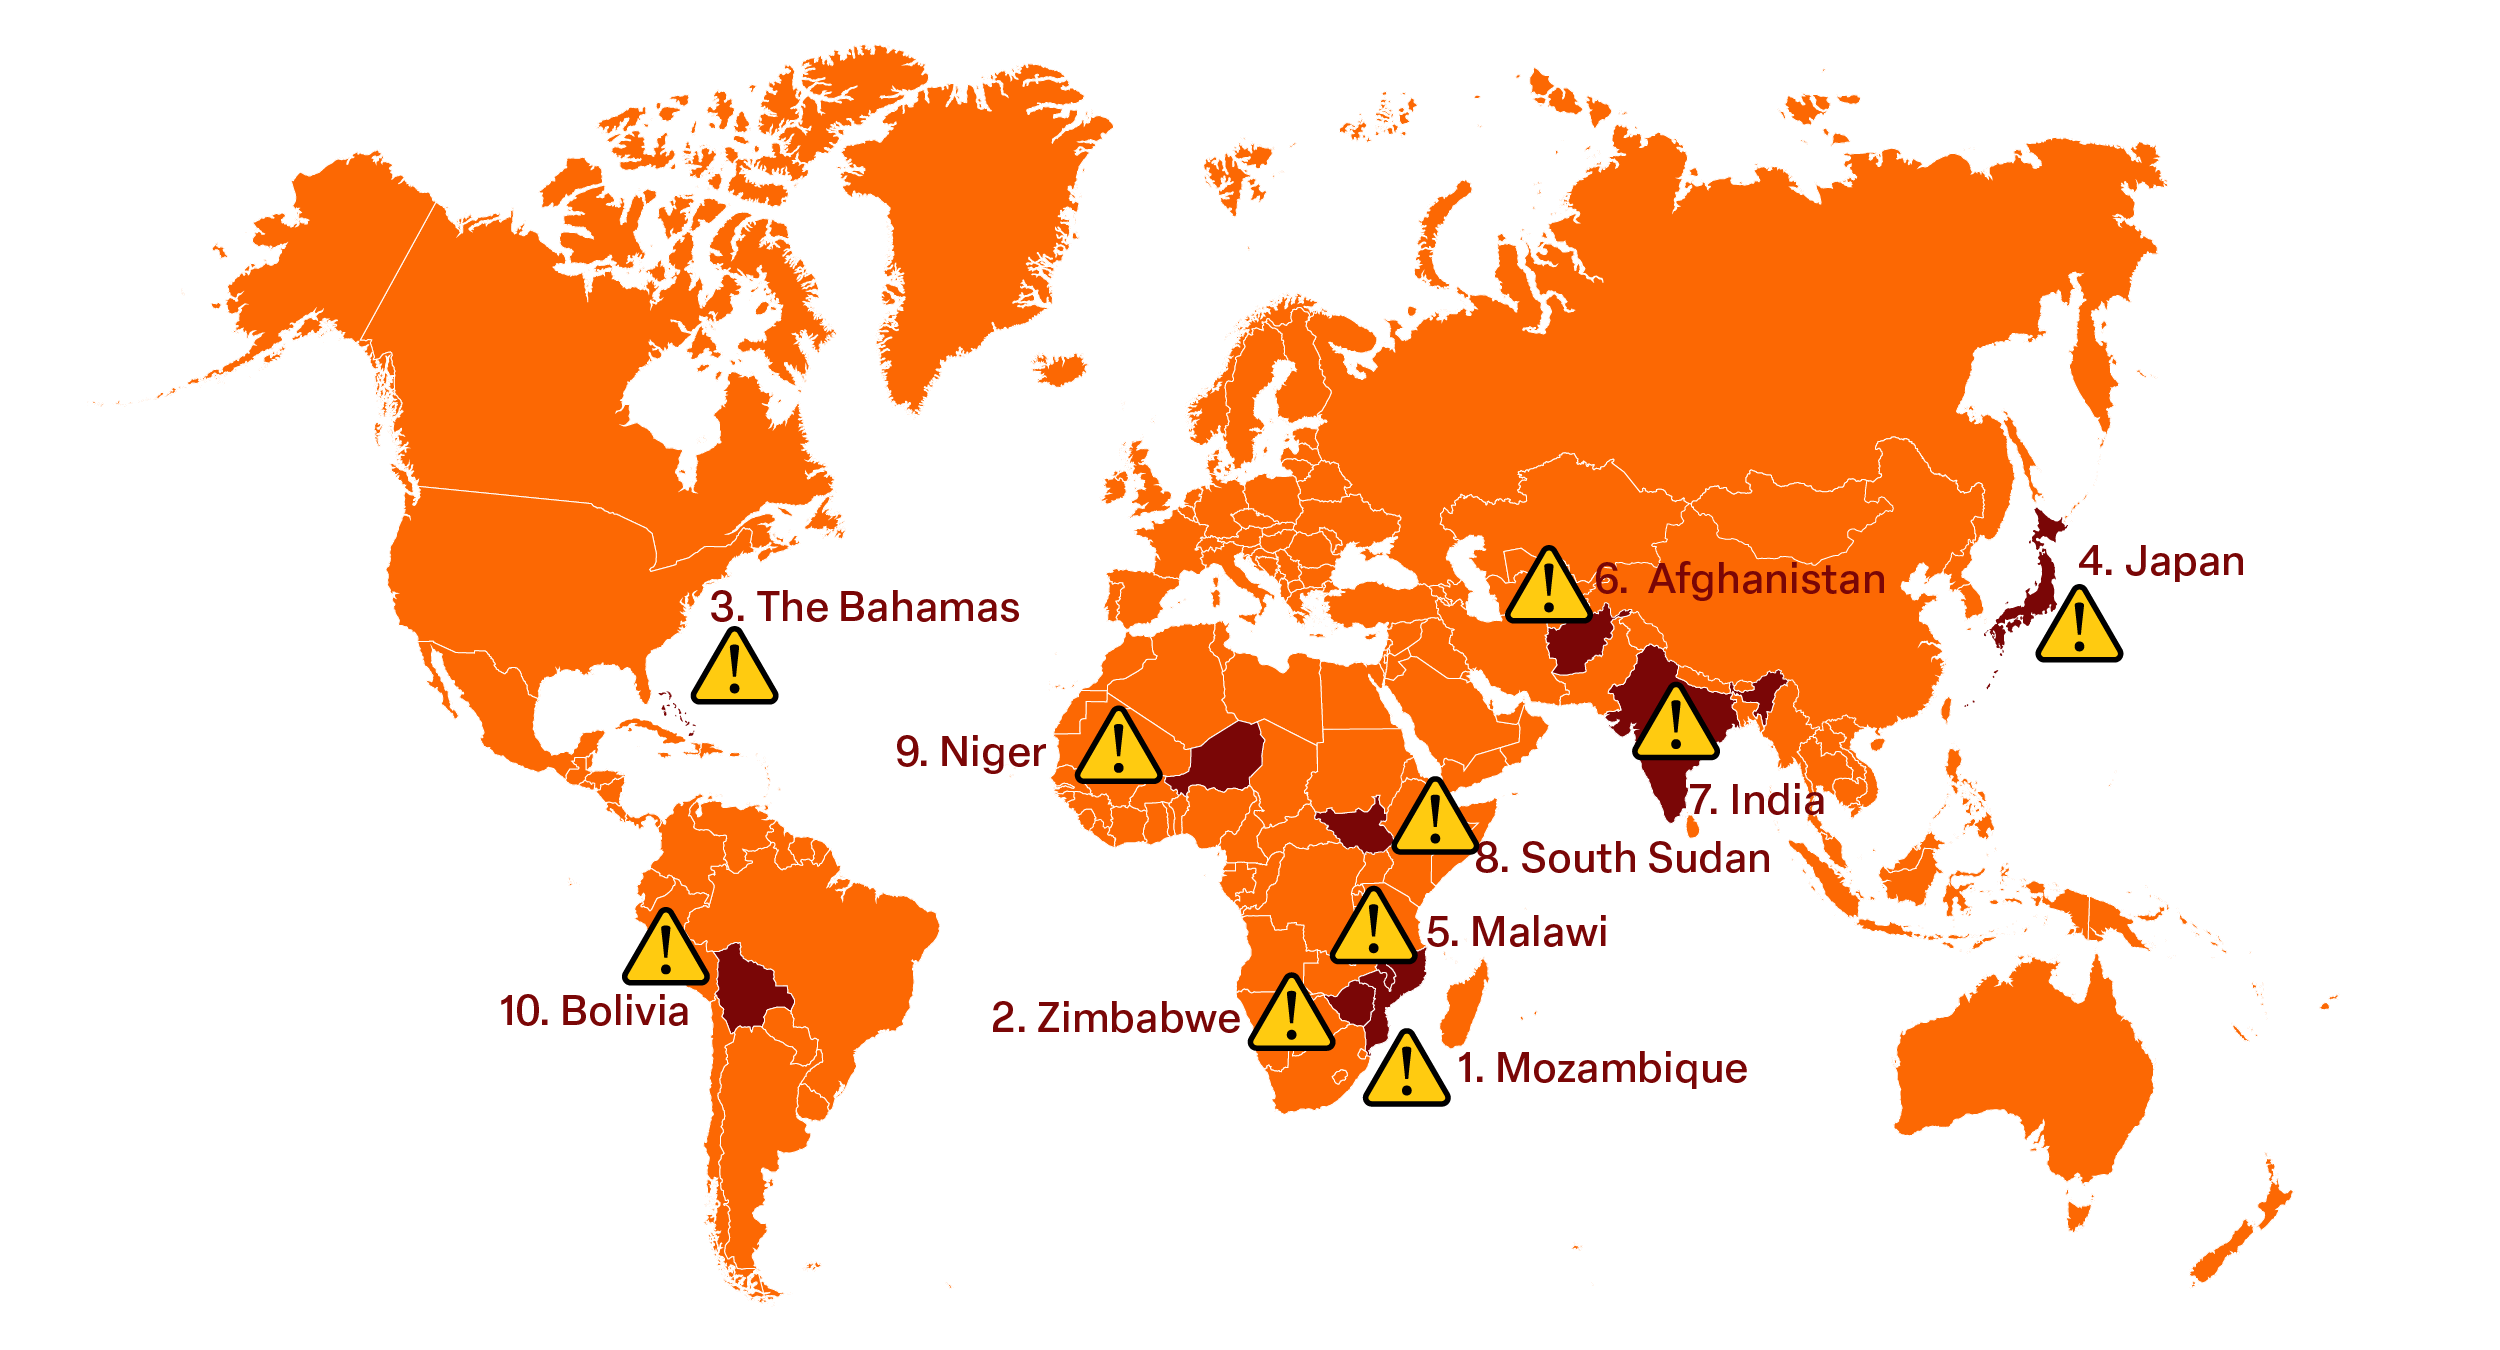 Map of the world highlighting 10 most affected countries. From 1 to 10, these are: Mozambique, Zimbabwe, The Bahamas, Japan, Malawi, Islamic Republic of Afghanistan, India, South Sudan, Niger and Bolivia.